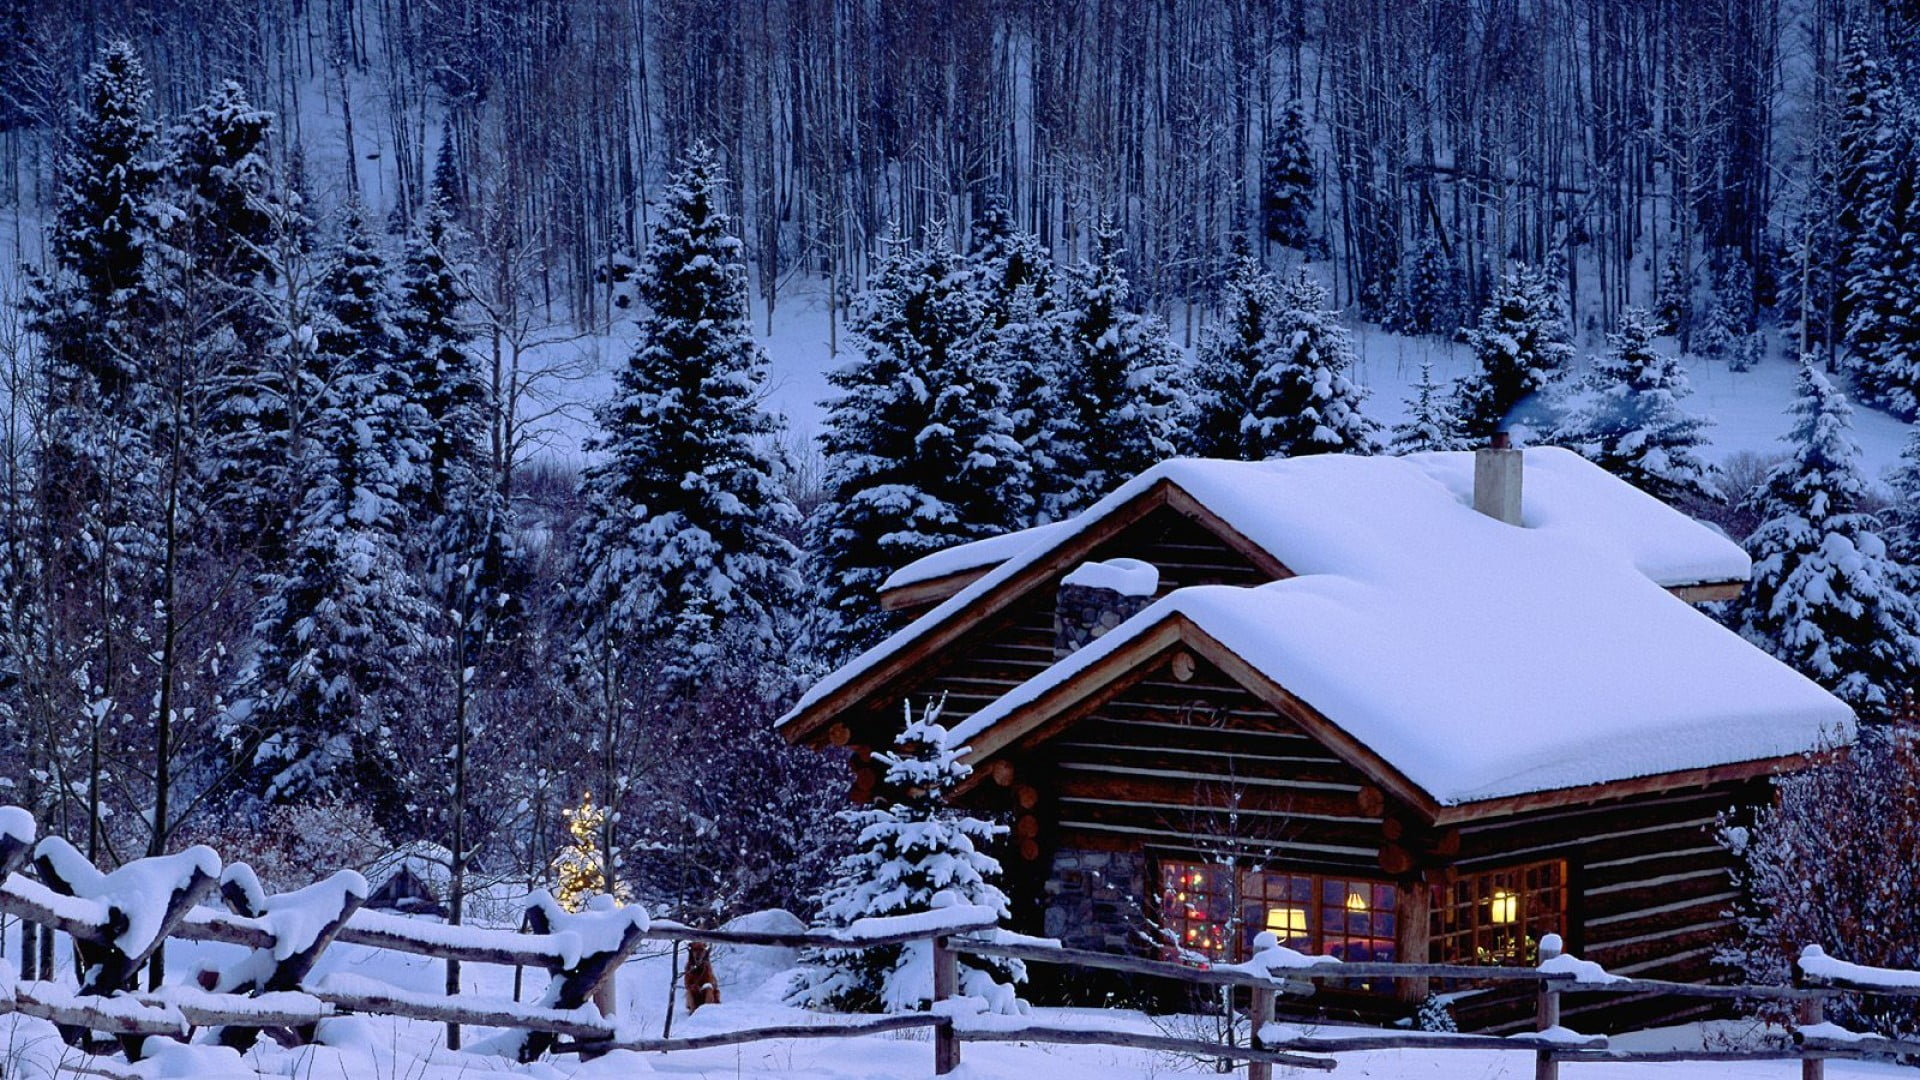 Christmas, snow, pine trees, cabin, winter, cold temperature